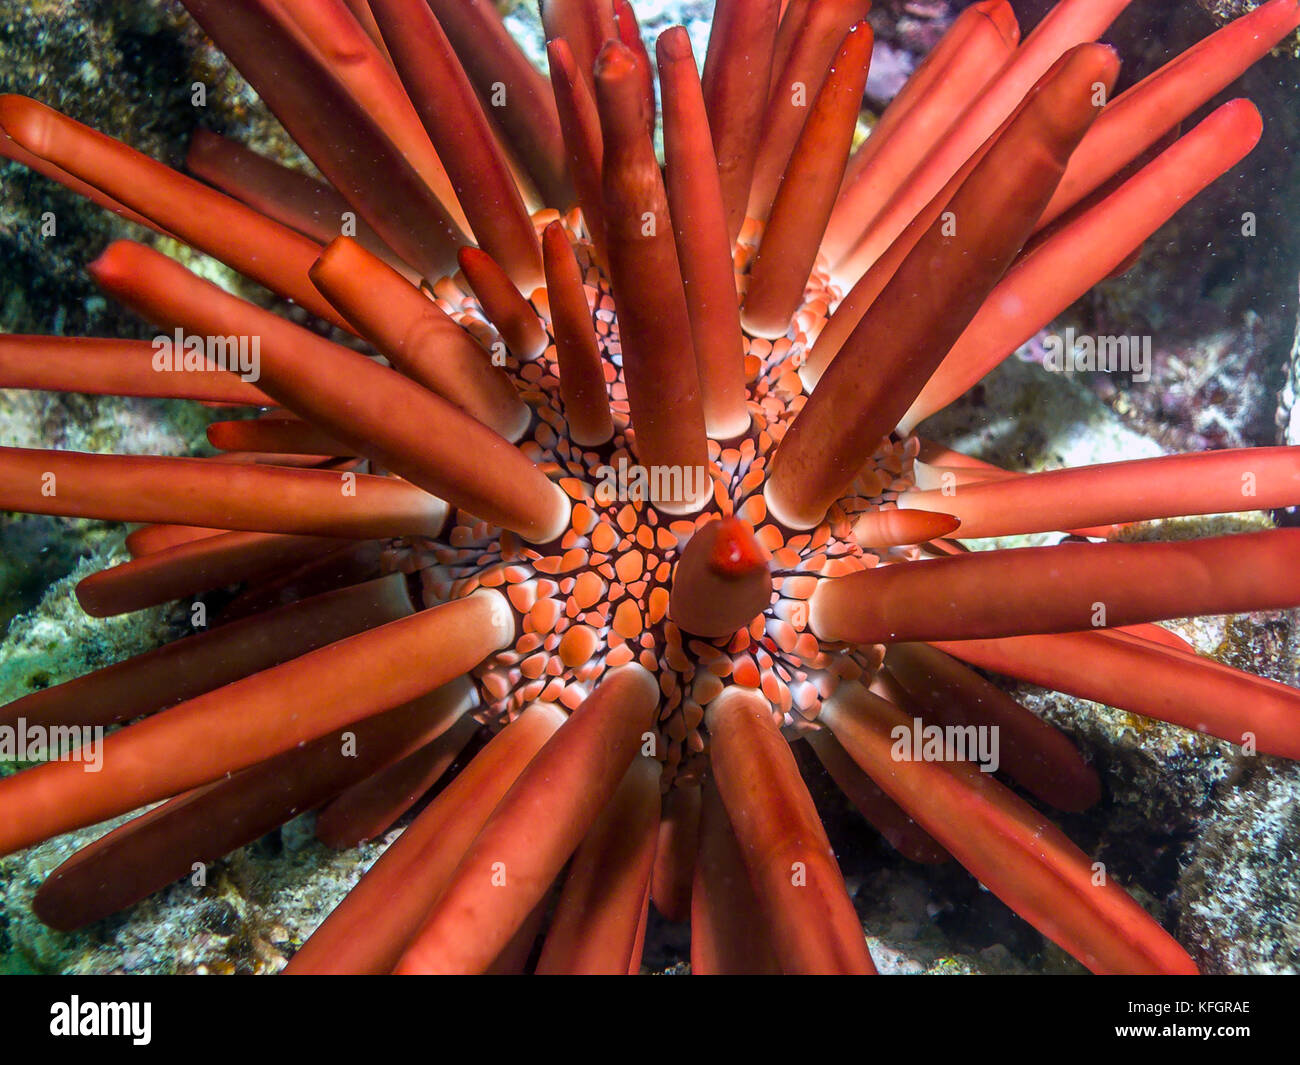 Heterocentrotus mamillatusn is a species of tropical sea urchin from the Indo-Pacific region. Stock Photo